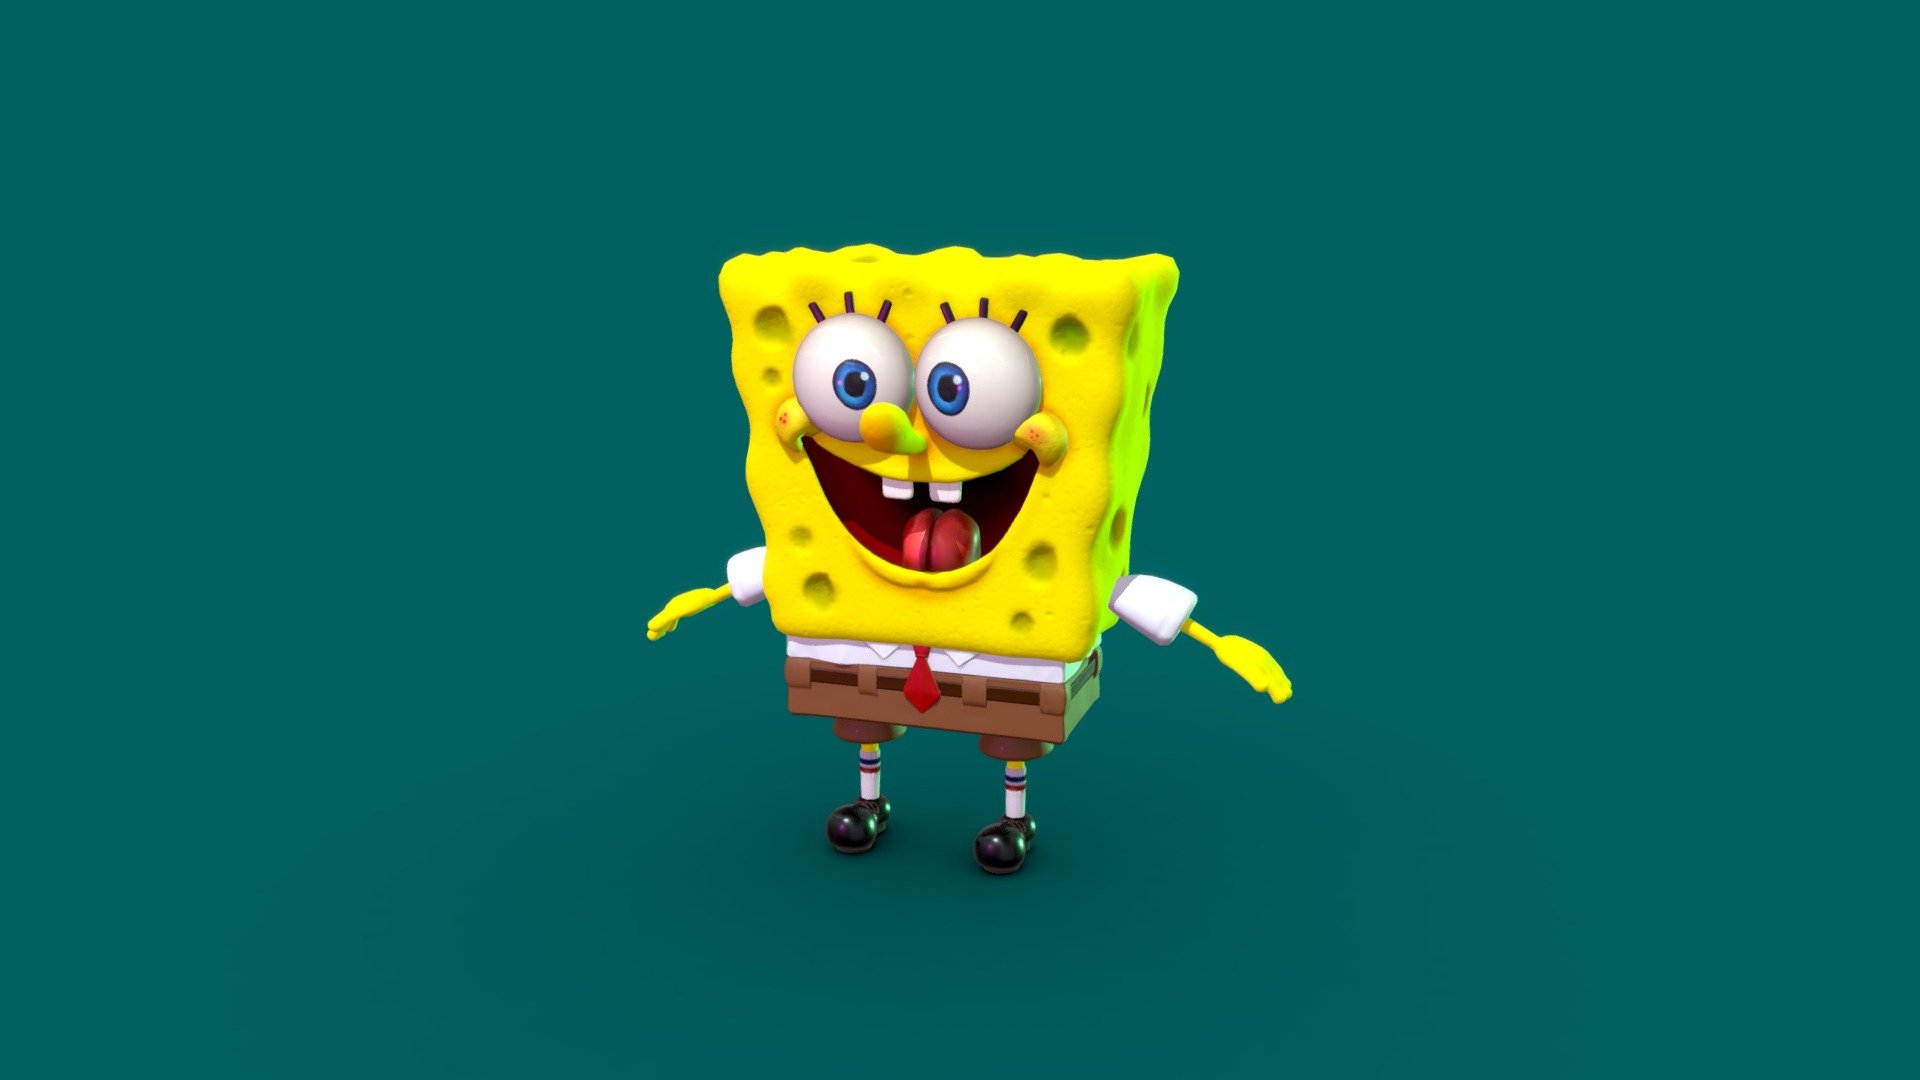 pongeBob SquarePants is an American animated comedy television series created by marine science educator and animator Stephen Hillenburg for Nickelodeon. The series chronicles the adventures and endeavors of the title character and his aquatic friends in the fictional underwater city of Bikini Bottom 3d model